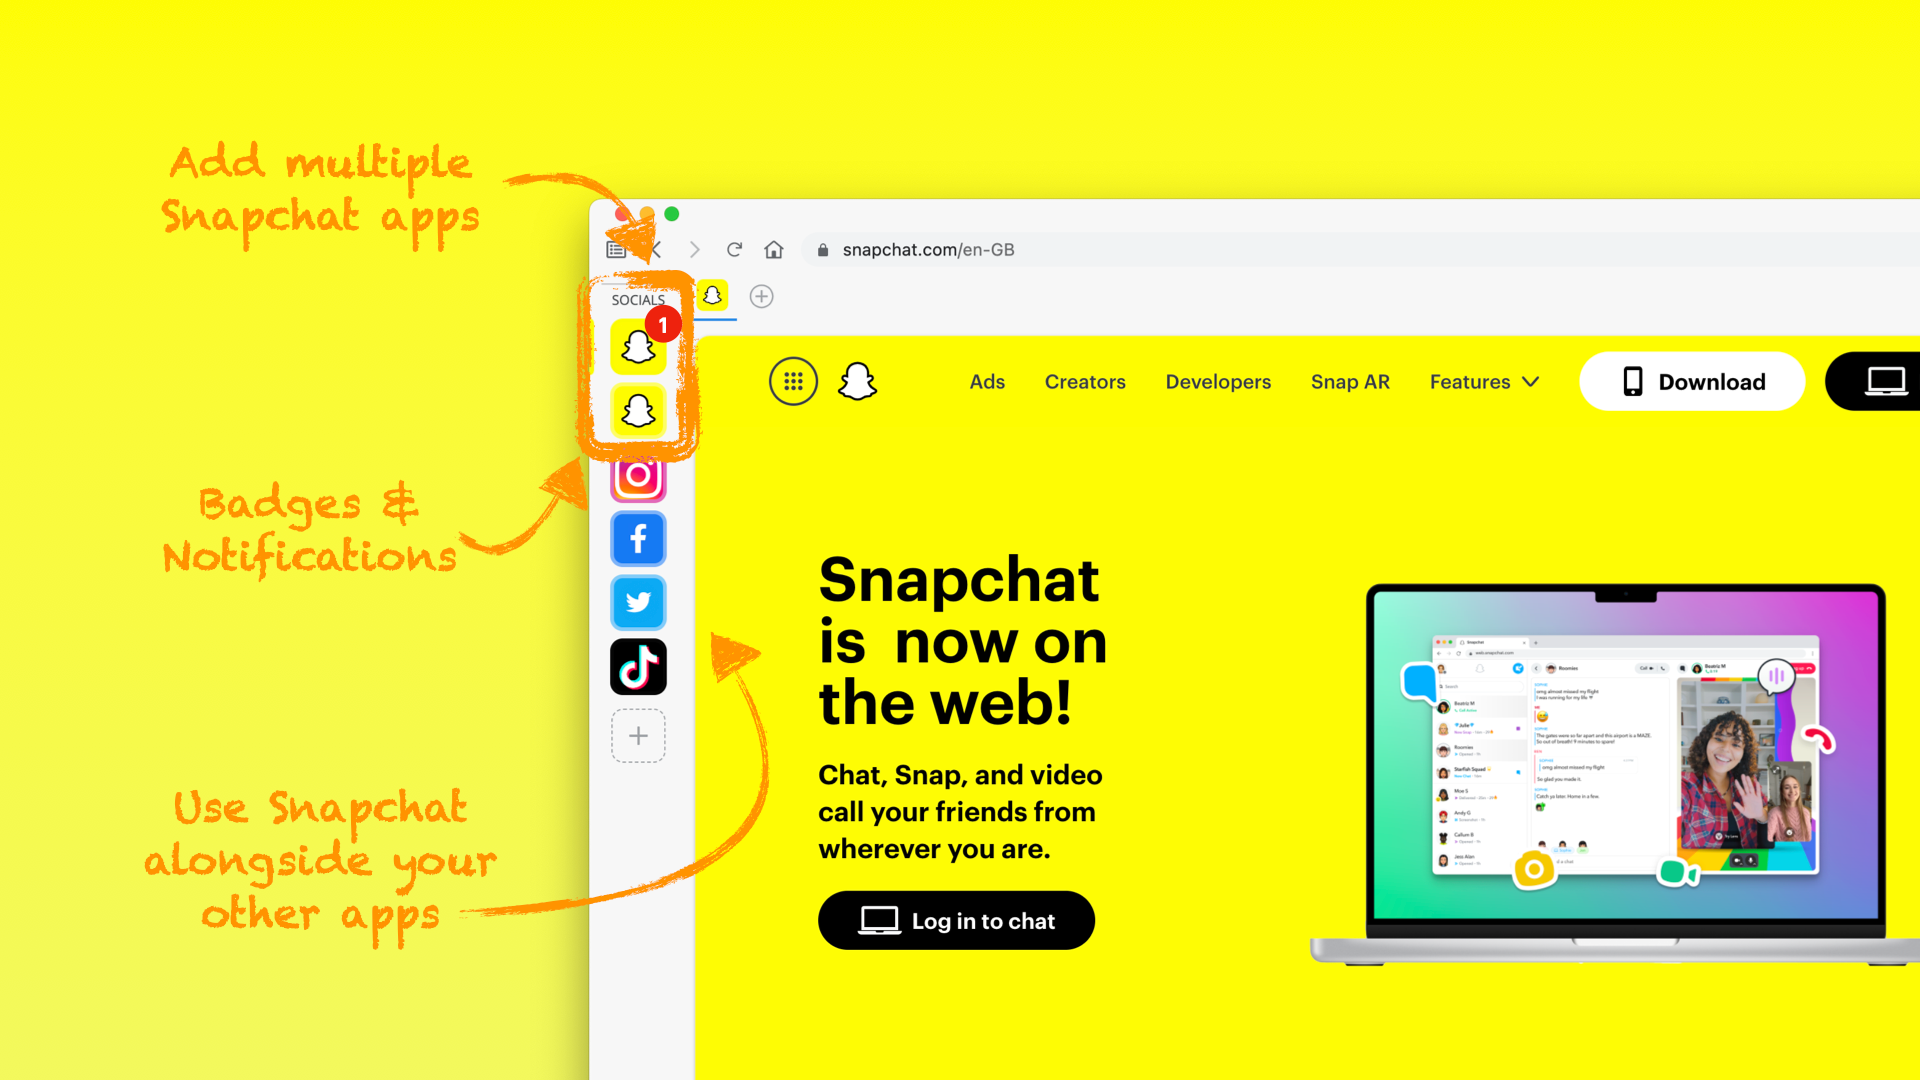 How to get a Snapchat app for desktop (Mac or PC)